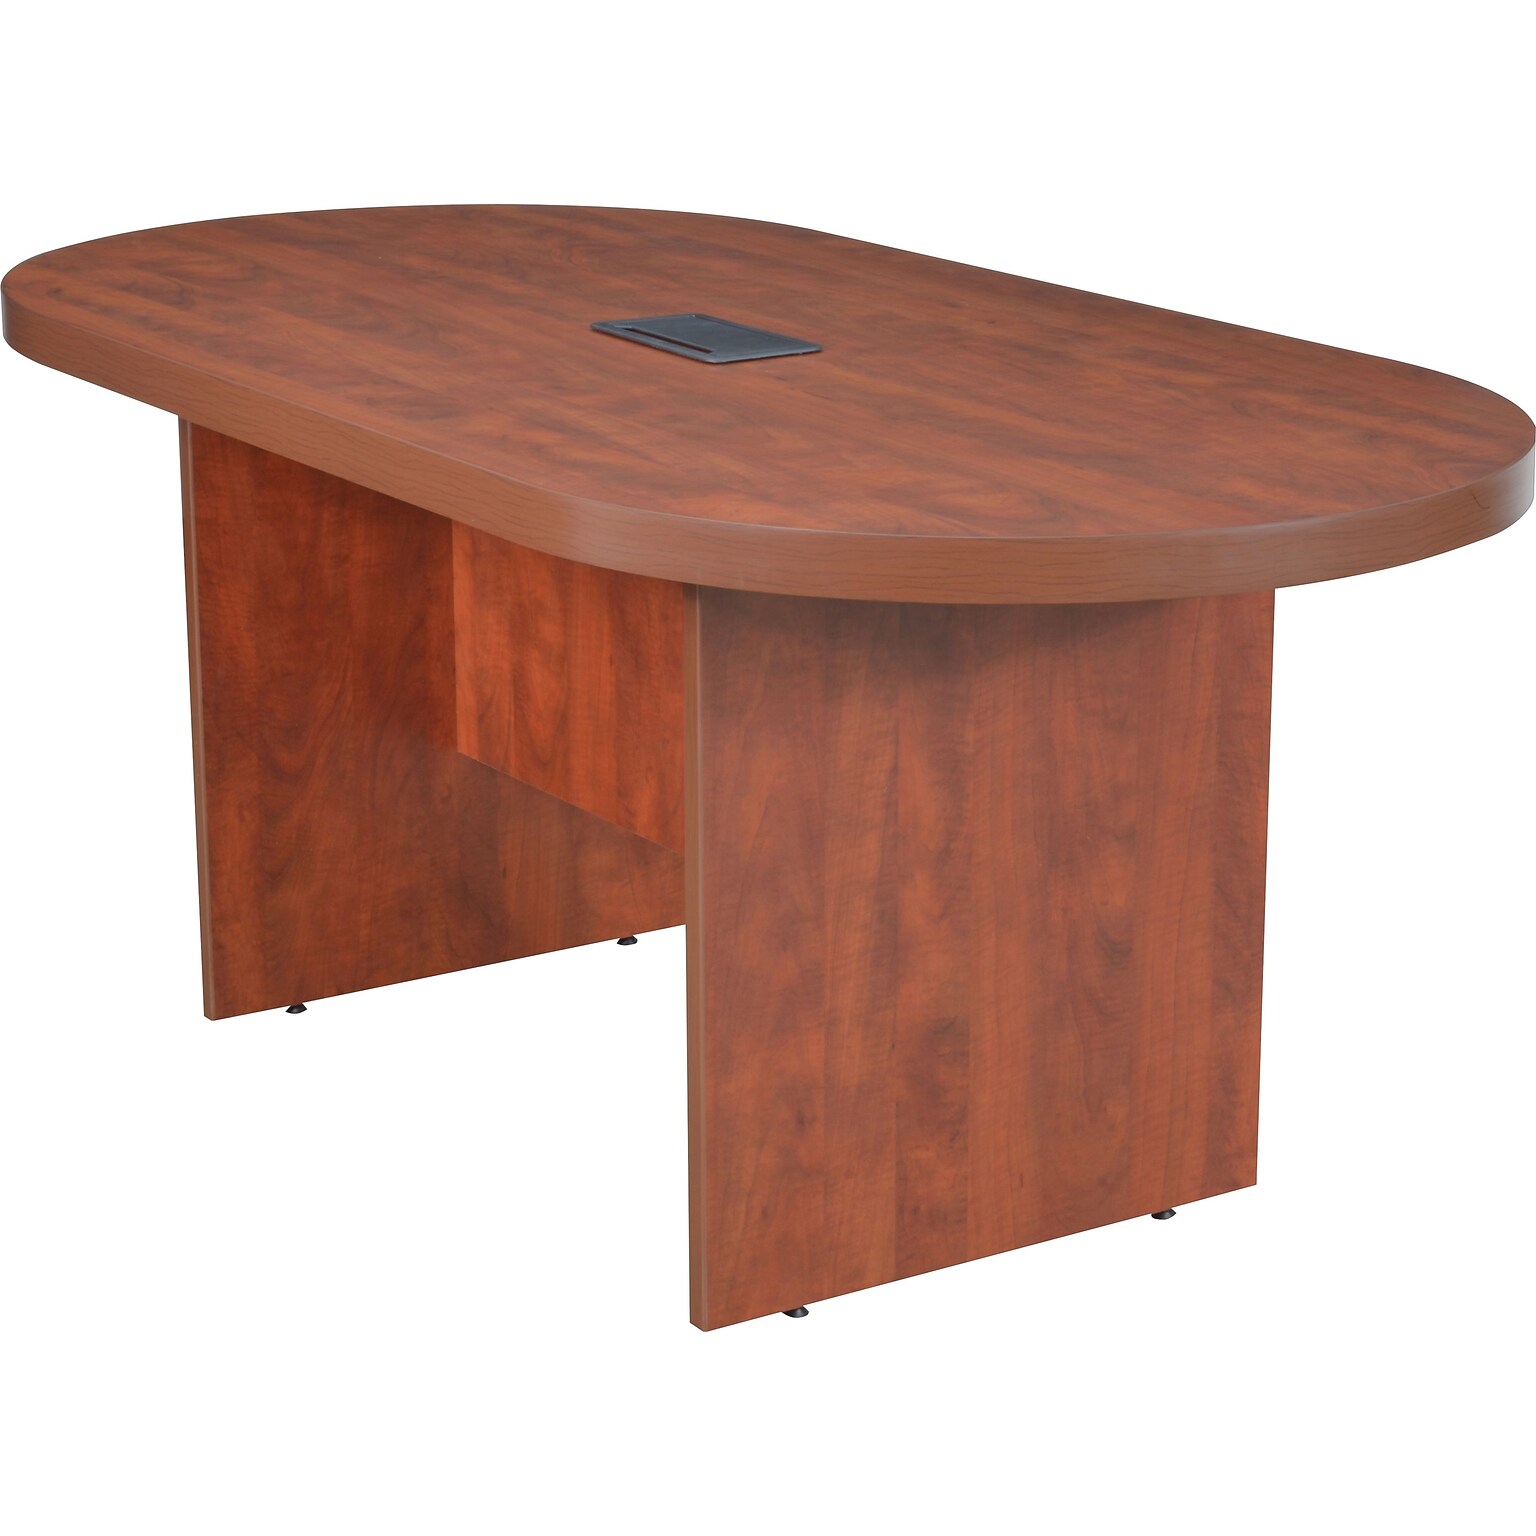 Regency Legacy 71 Racetrack Conference Table, Cherry (LCTRT7135CH)